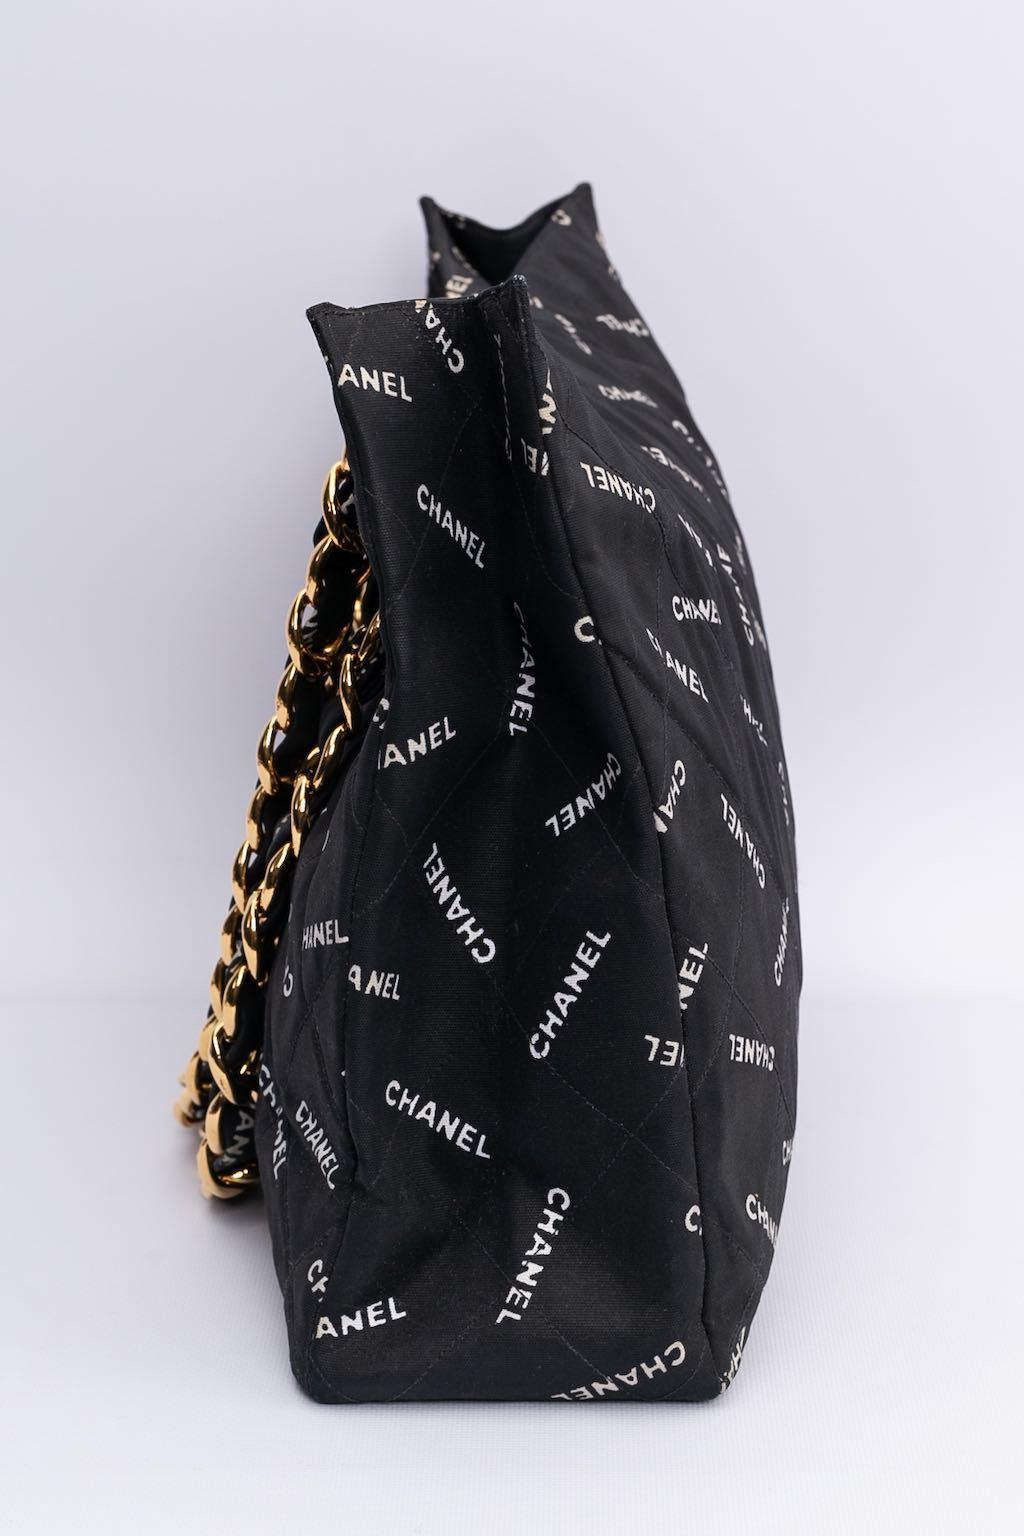 Chanel (Made in France)- Tote bag in black jersey printed with 